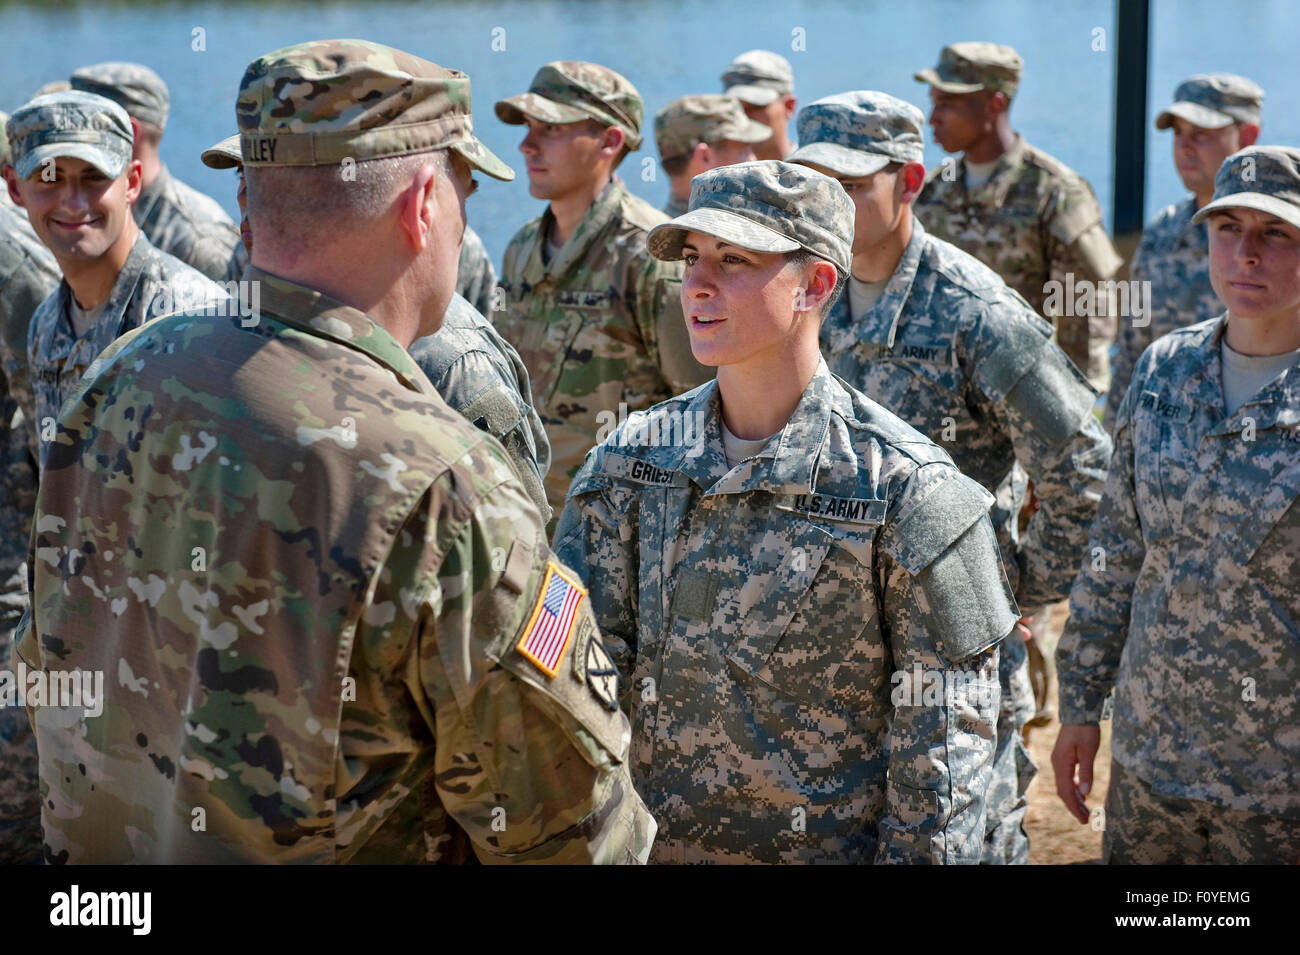 U.S. Army Captain Kristen Griest is congratulated by Army Chief of Staff Gen. Mark A. Milley after becoming the first woman to graduate from Army Ranger school August 21, 2015 at Fort Benning, Georgia. Griest and fellow soldier 1st Lt. Shaye Haver became the first women to graduate from the 61-day-long Ranger course considered one of the most intense and demanding in the military. Stock Photo